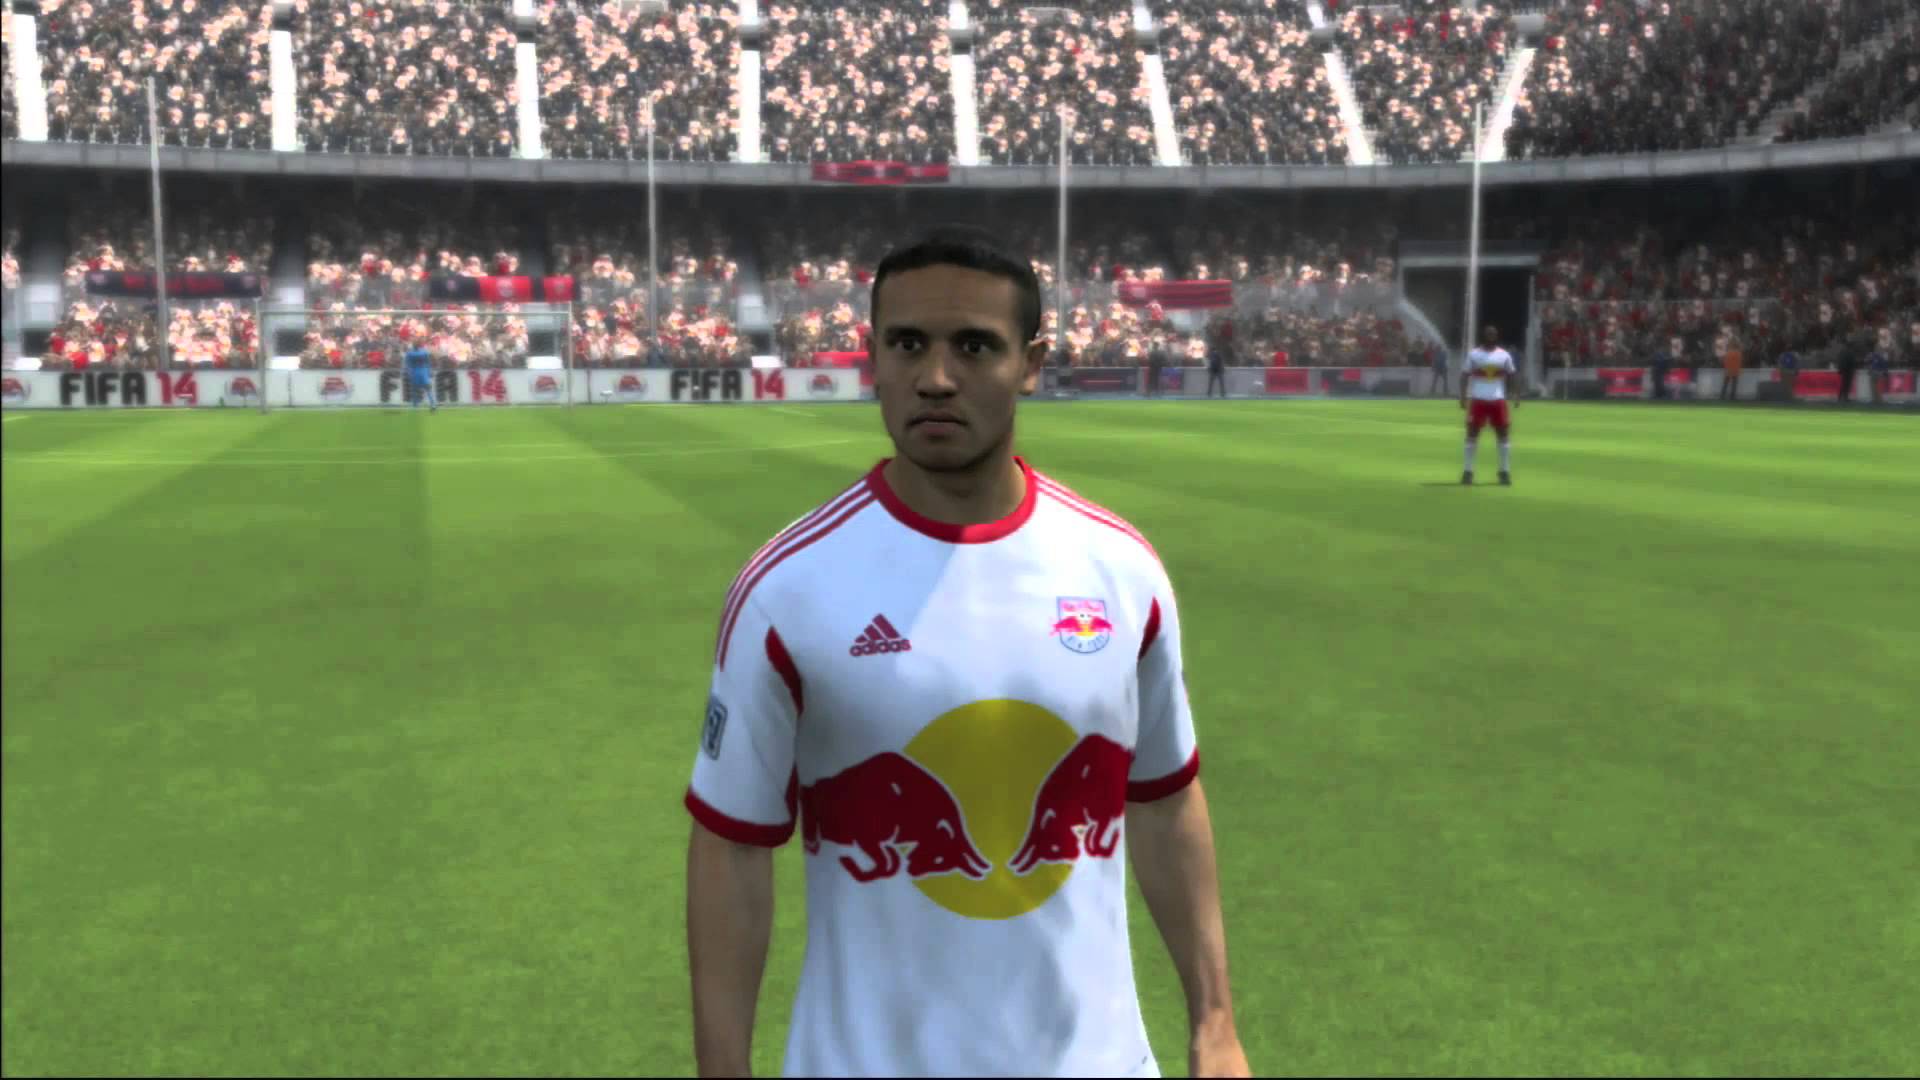 FIFA 14 | NEW YORK RED BULLS FULL SQUAD | Demo Player Faces - YouTube